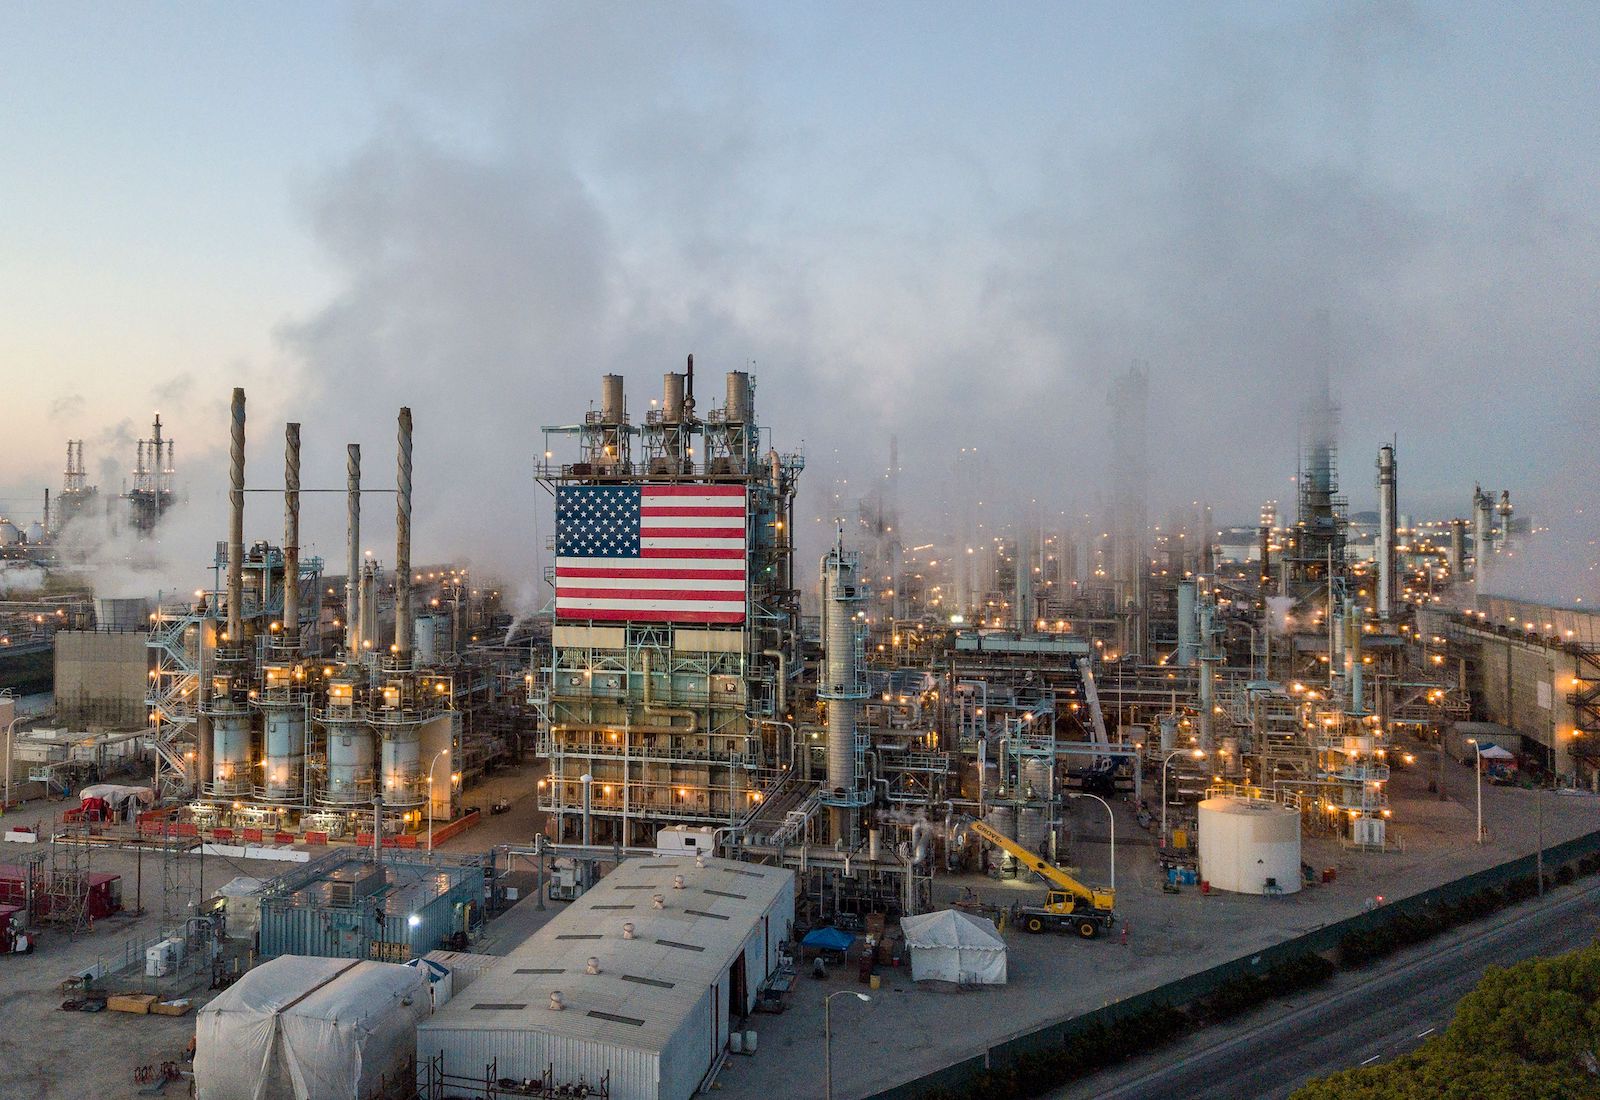 An American flag hangs from an oil refinery